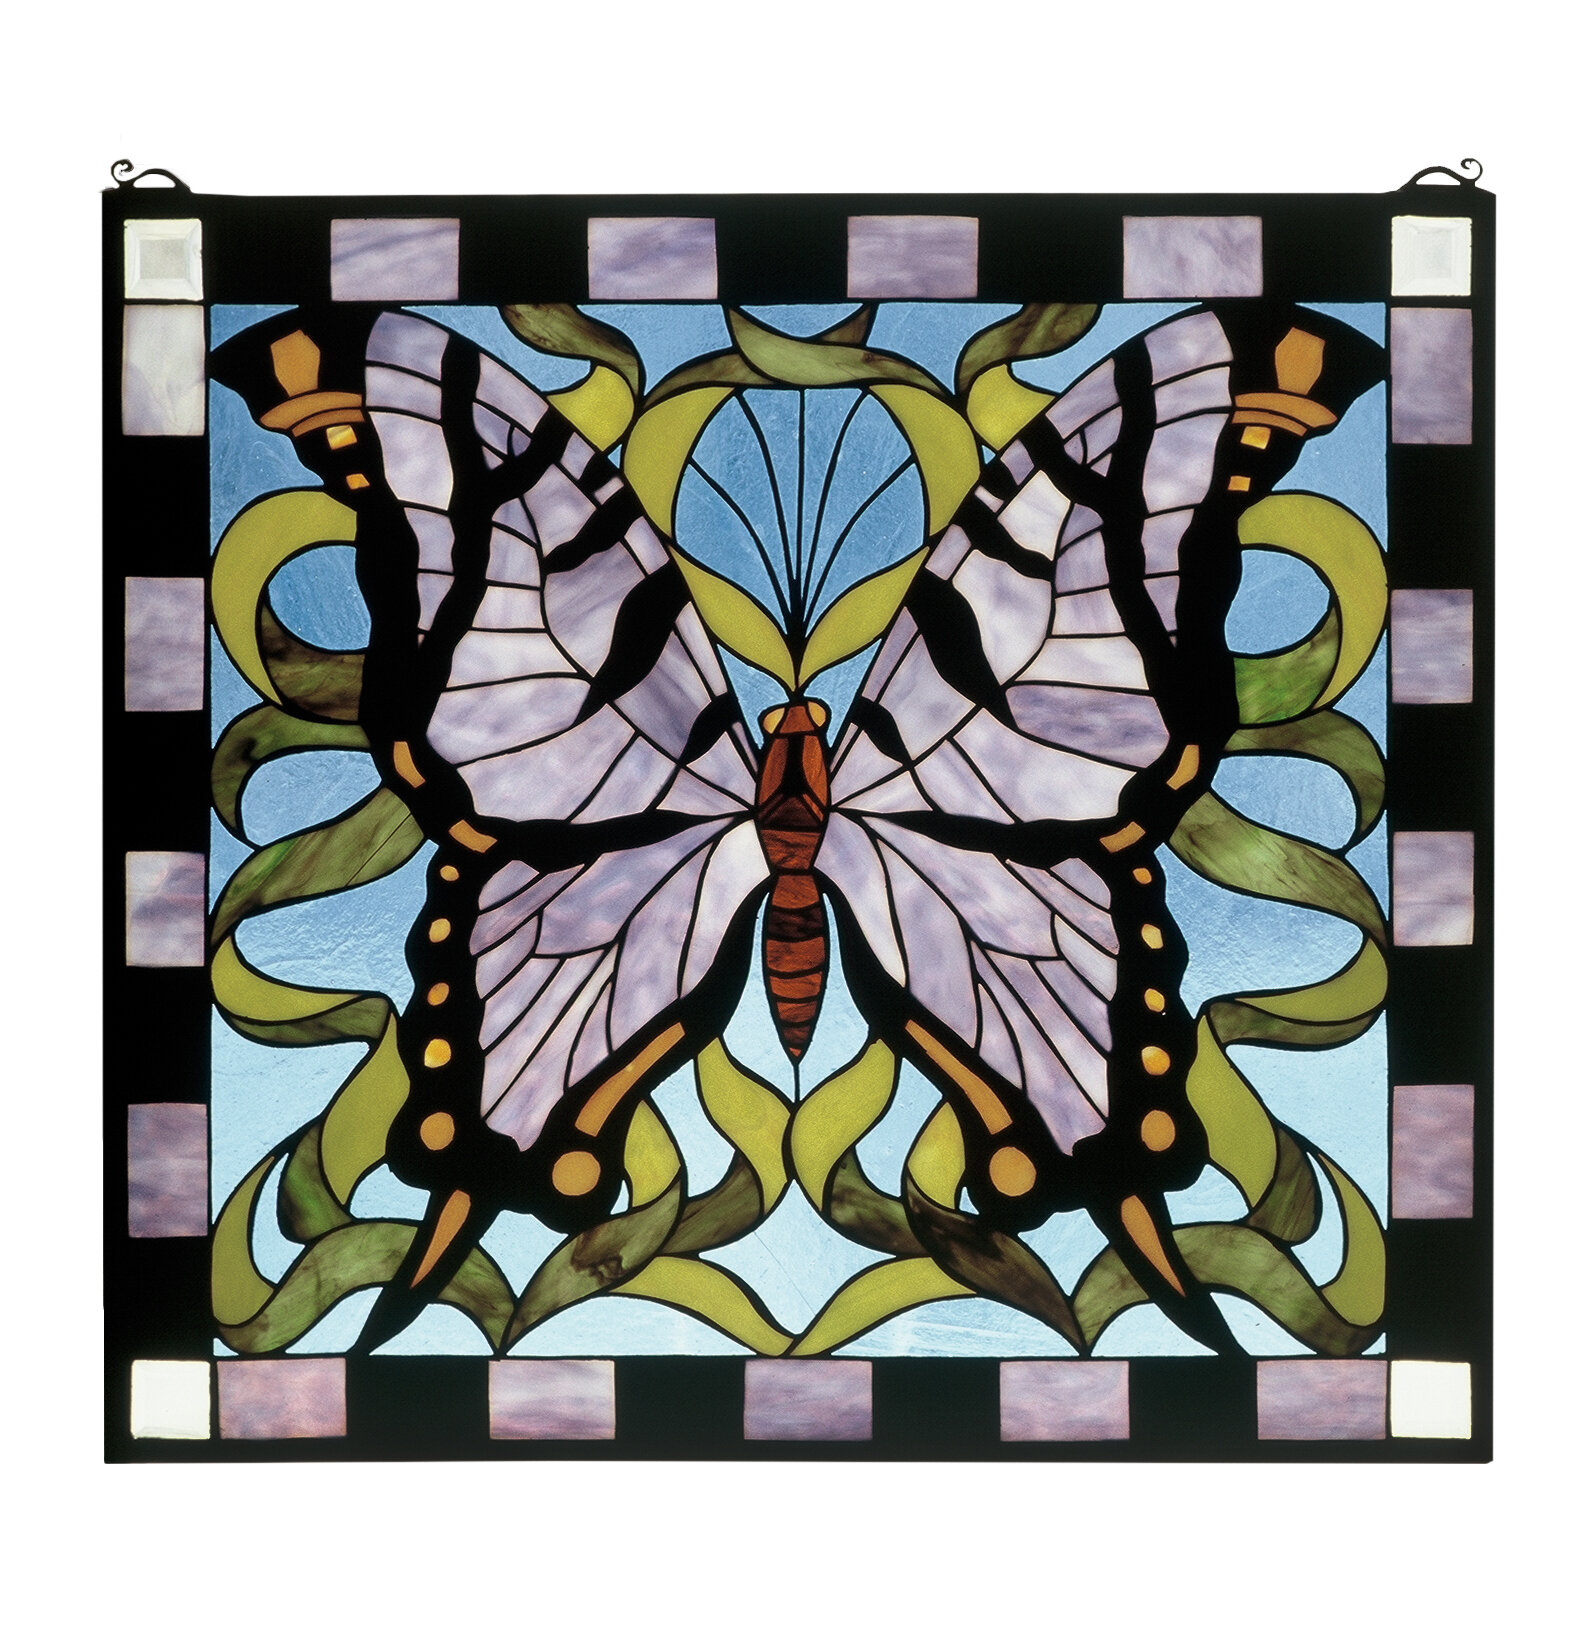 Octagonal Butterfly & Flowers Stained Glass Window Panel